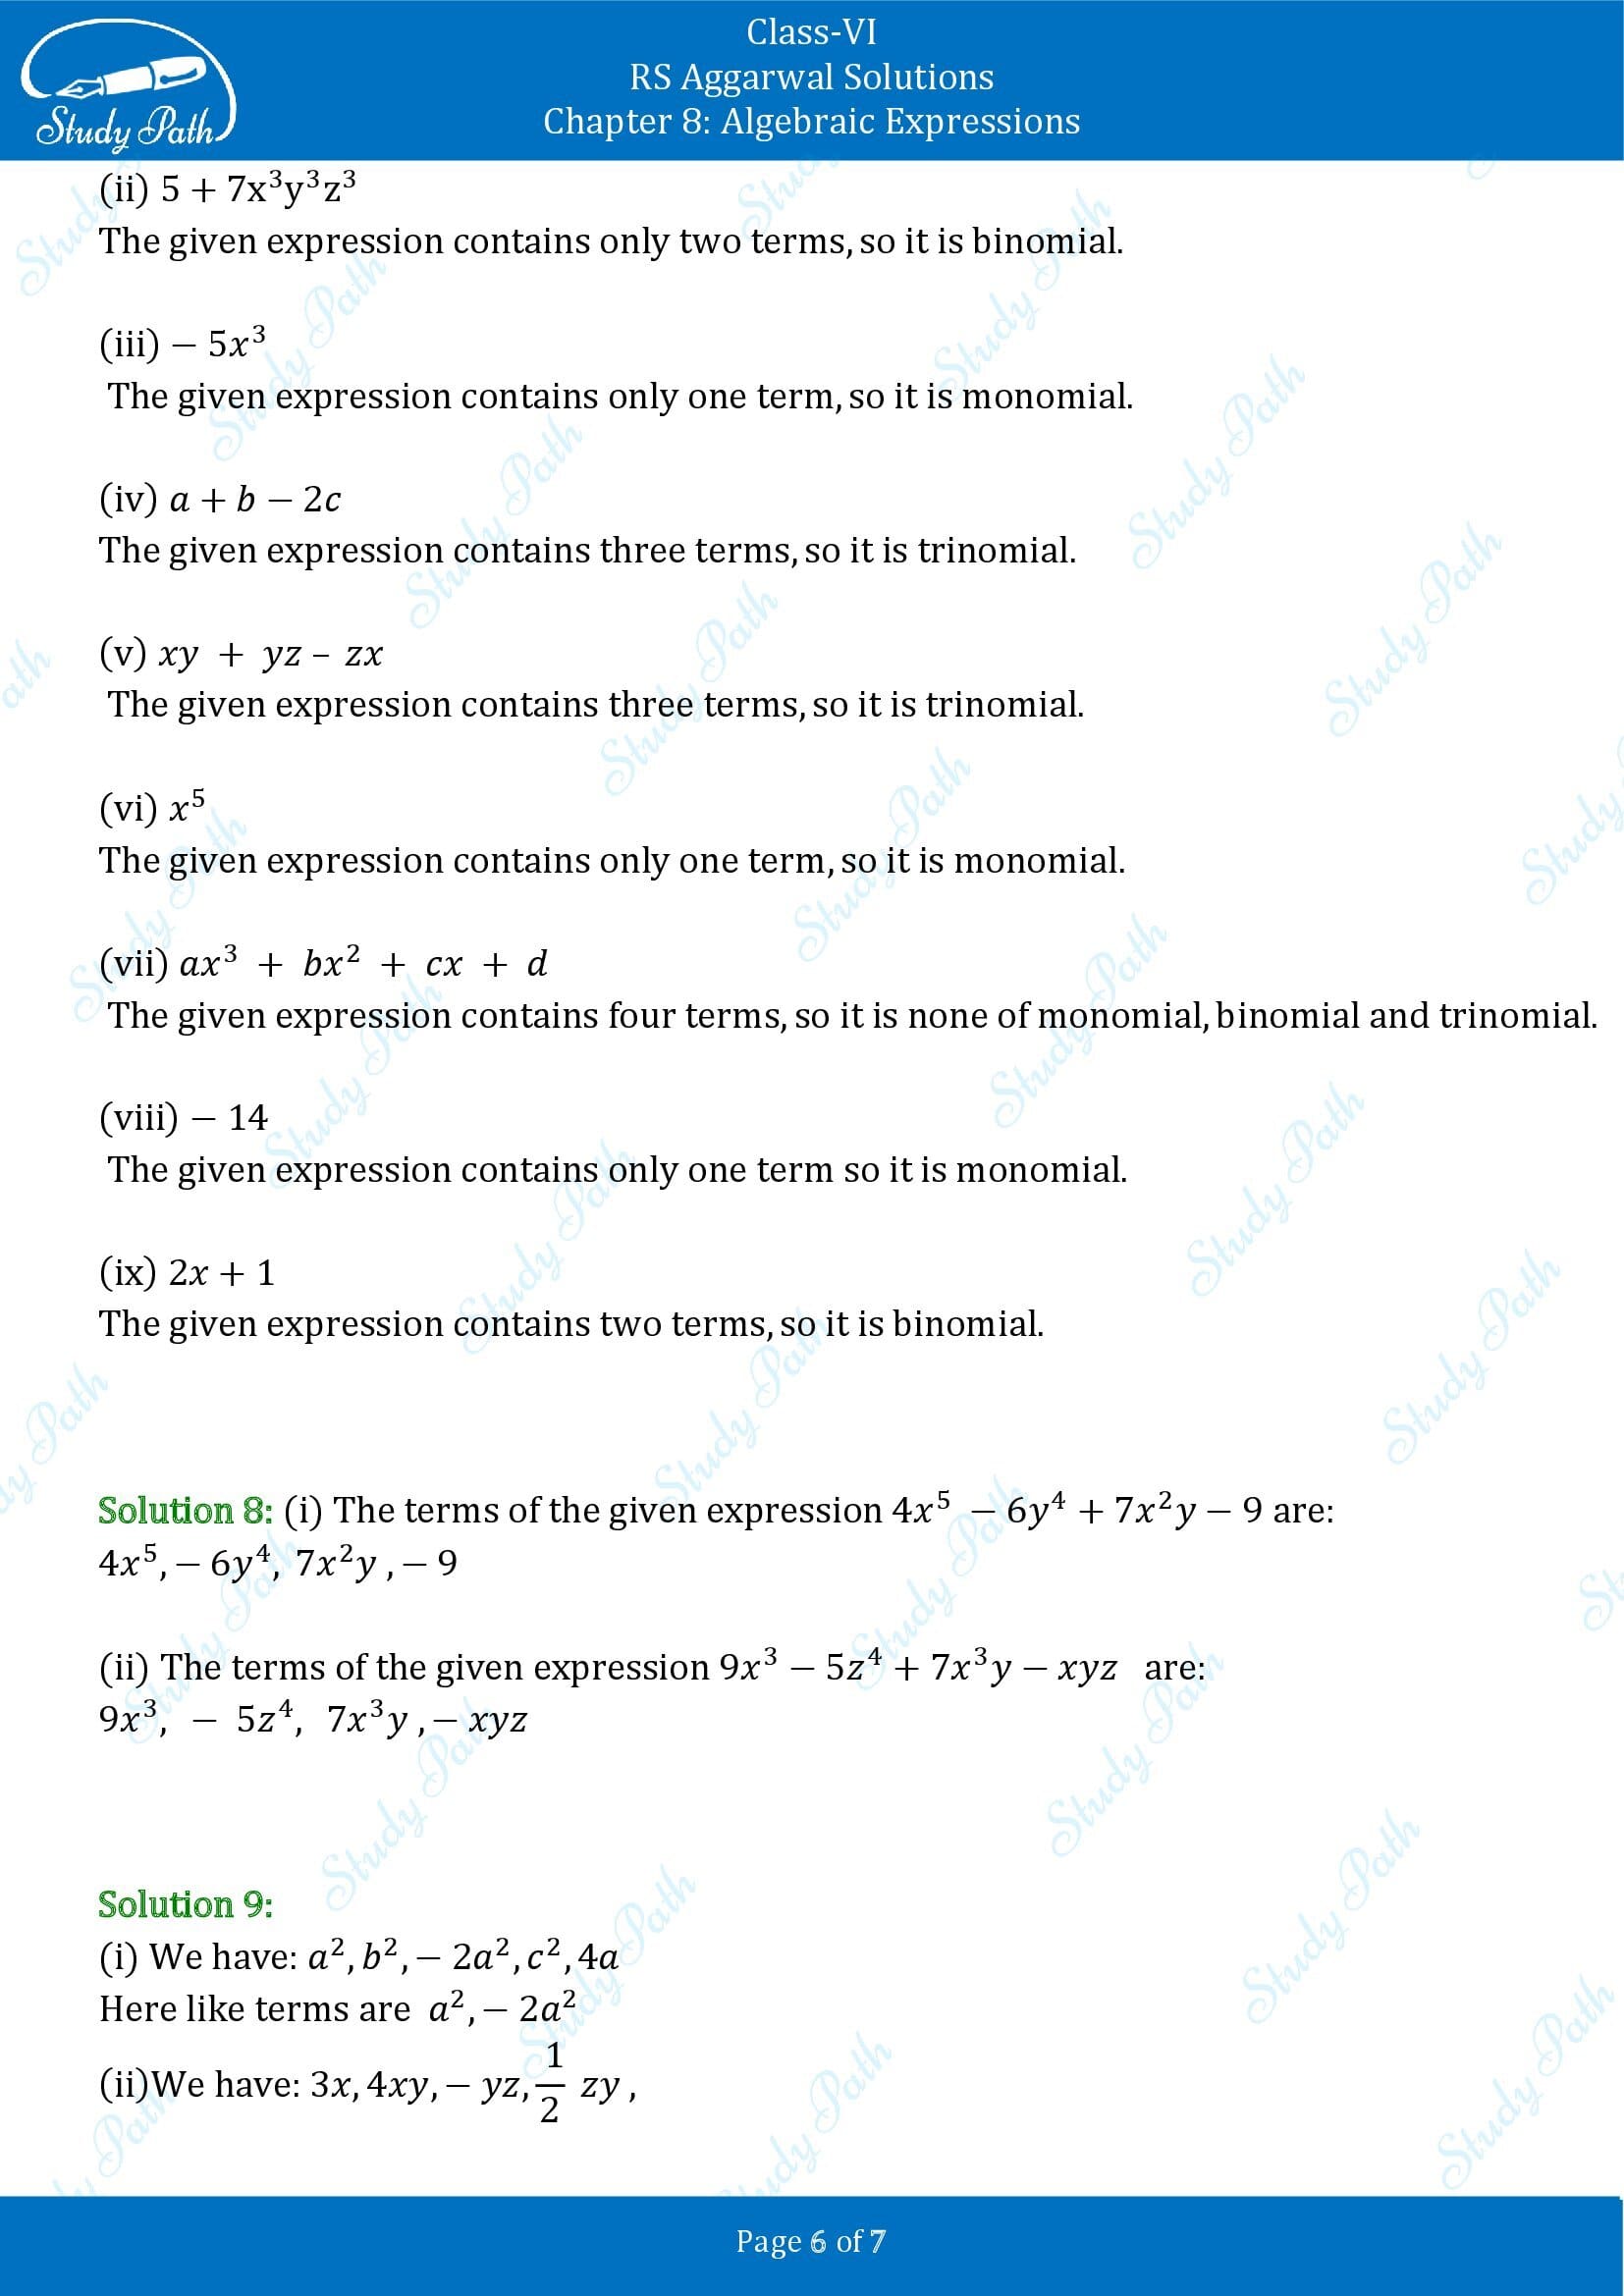 RS Aggarwal Solutions Class 6 Chapter 8 Algebraic Expressions Exercise 8B 0006